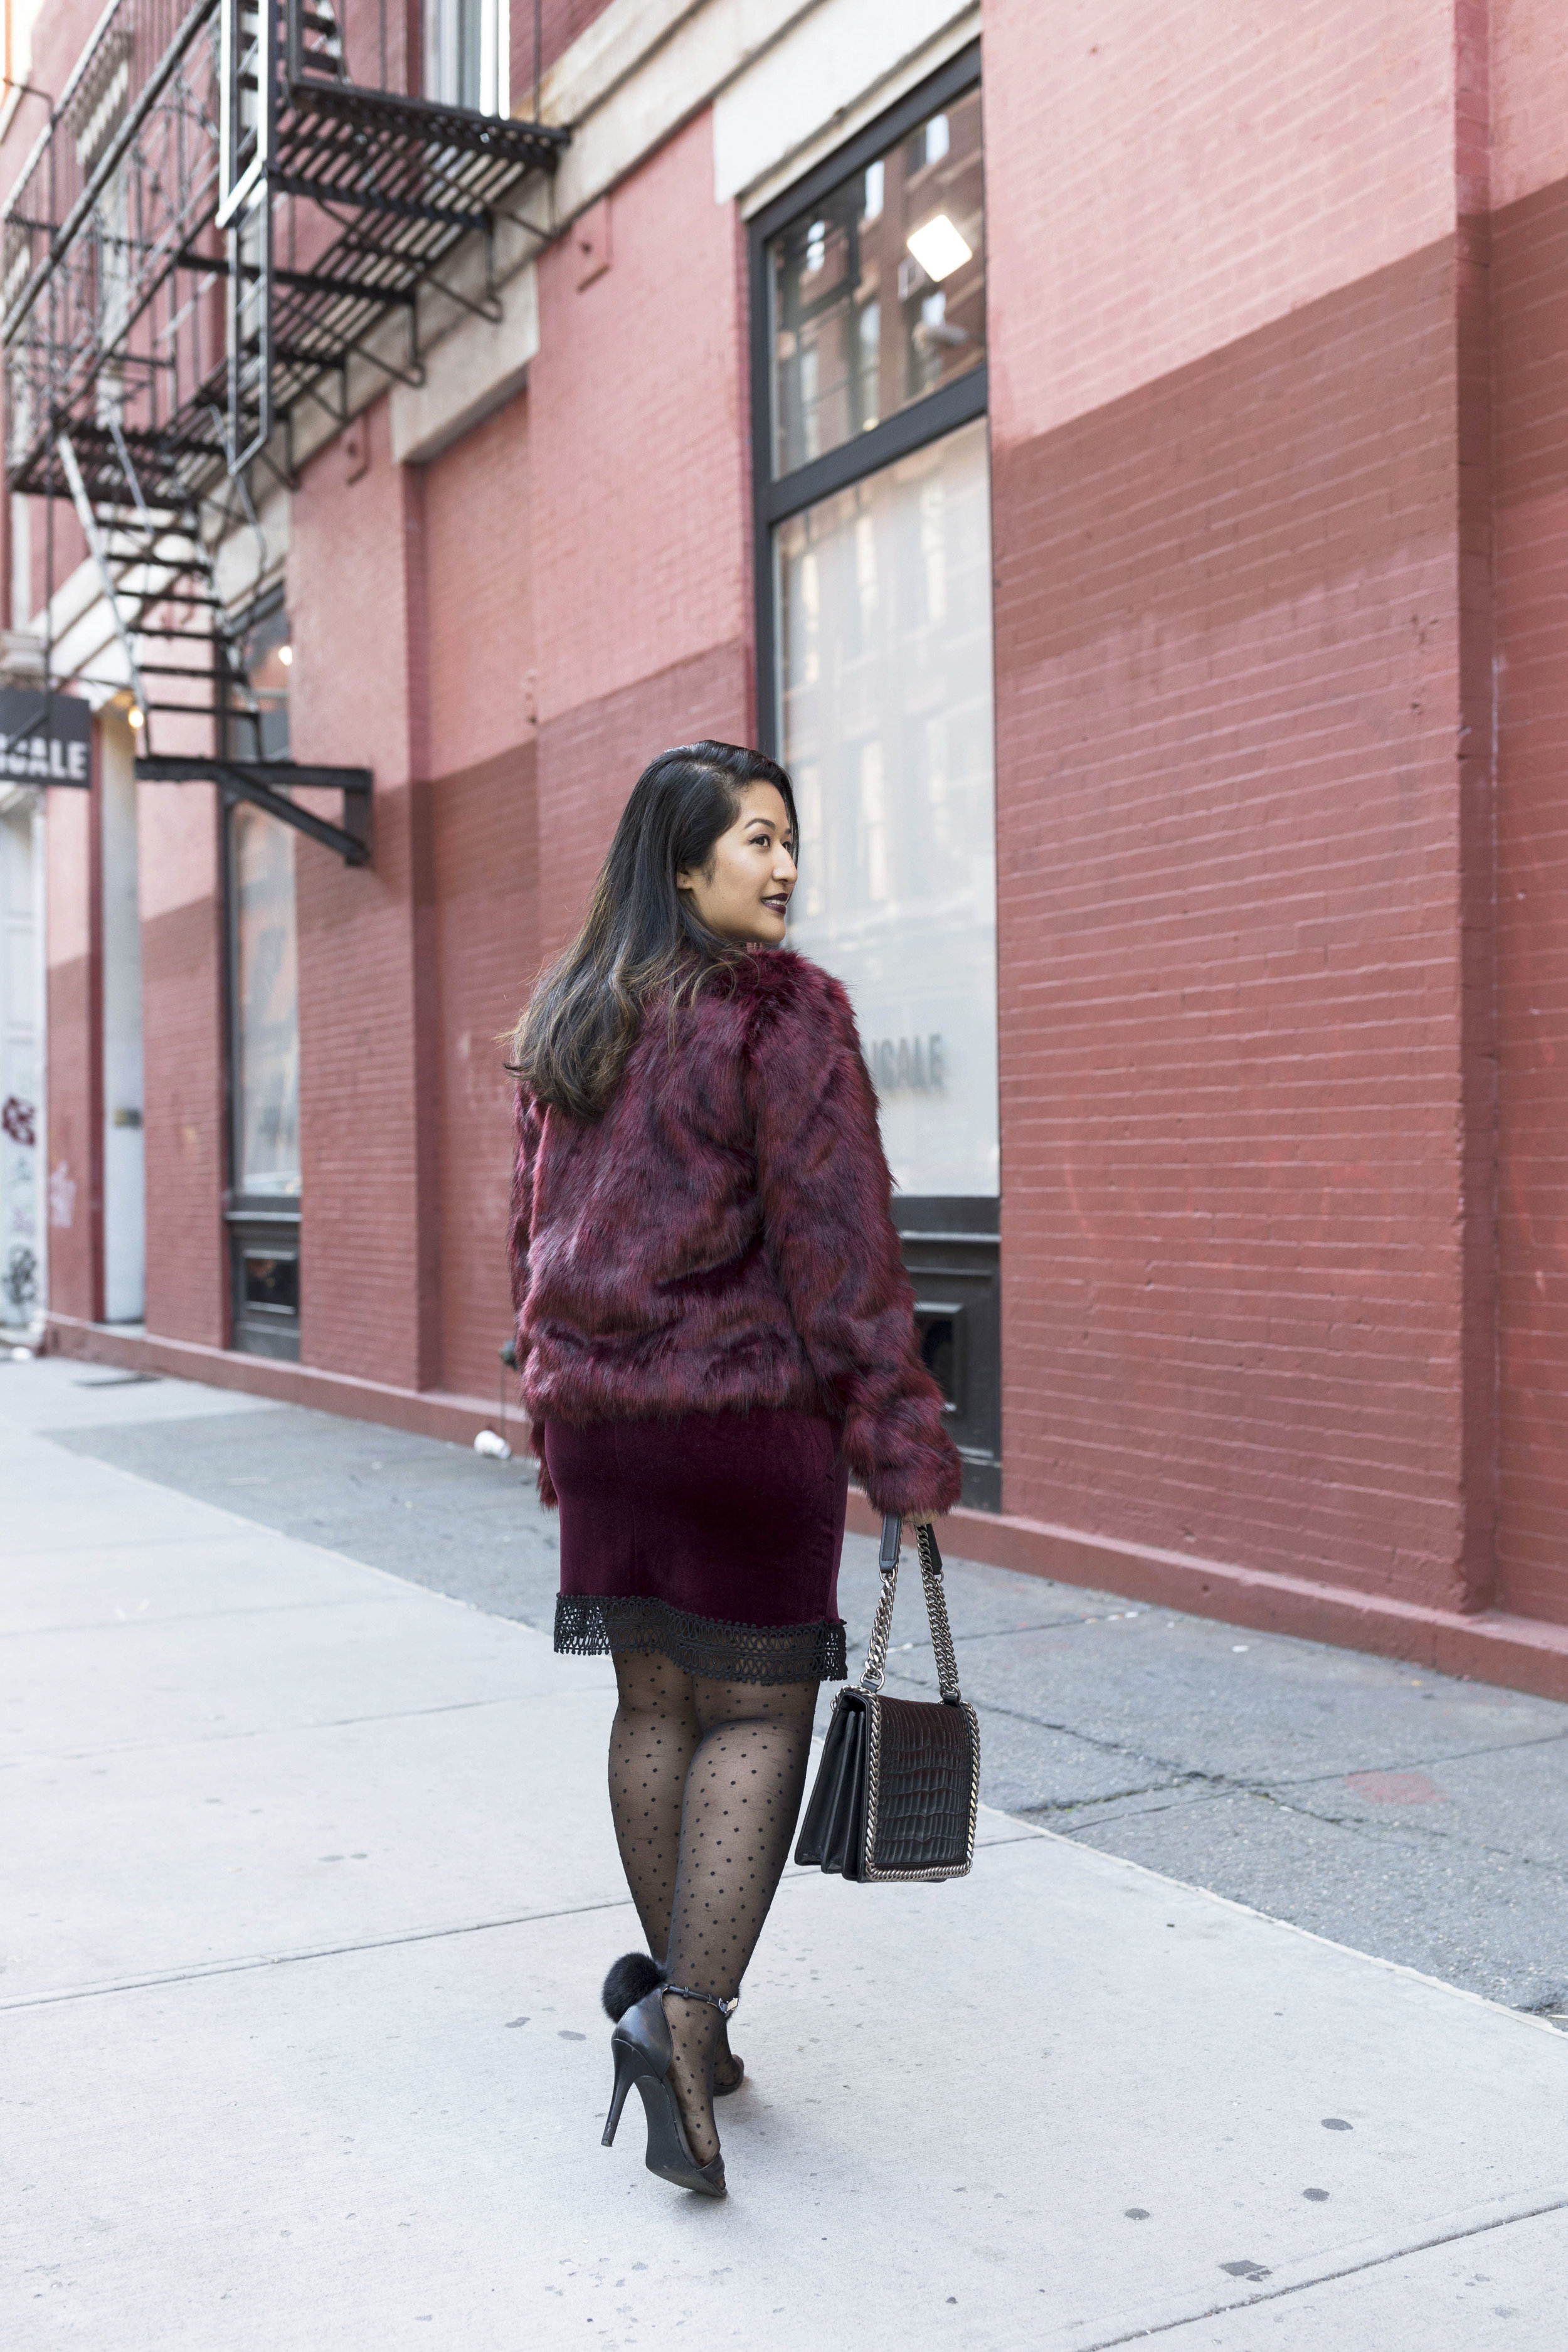 Krity S x Holiday Outfit x Century 21 Burgundy Velvet Dress and Faux Fur3.jpg